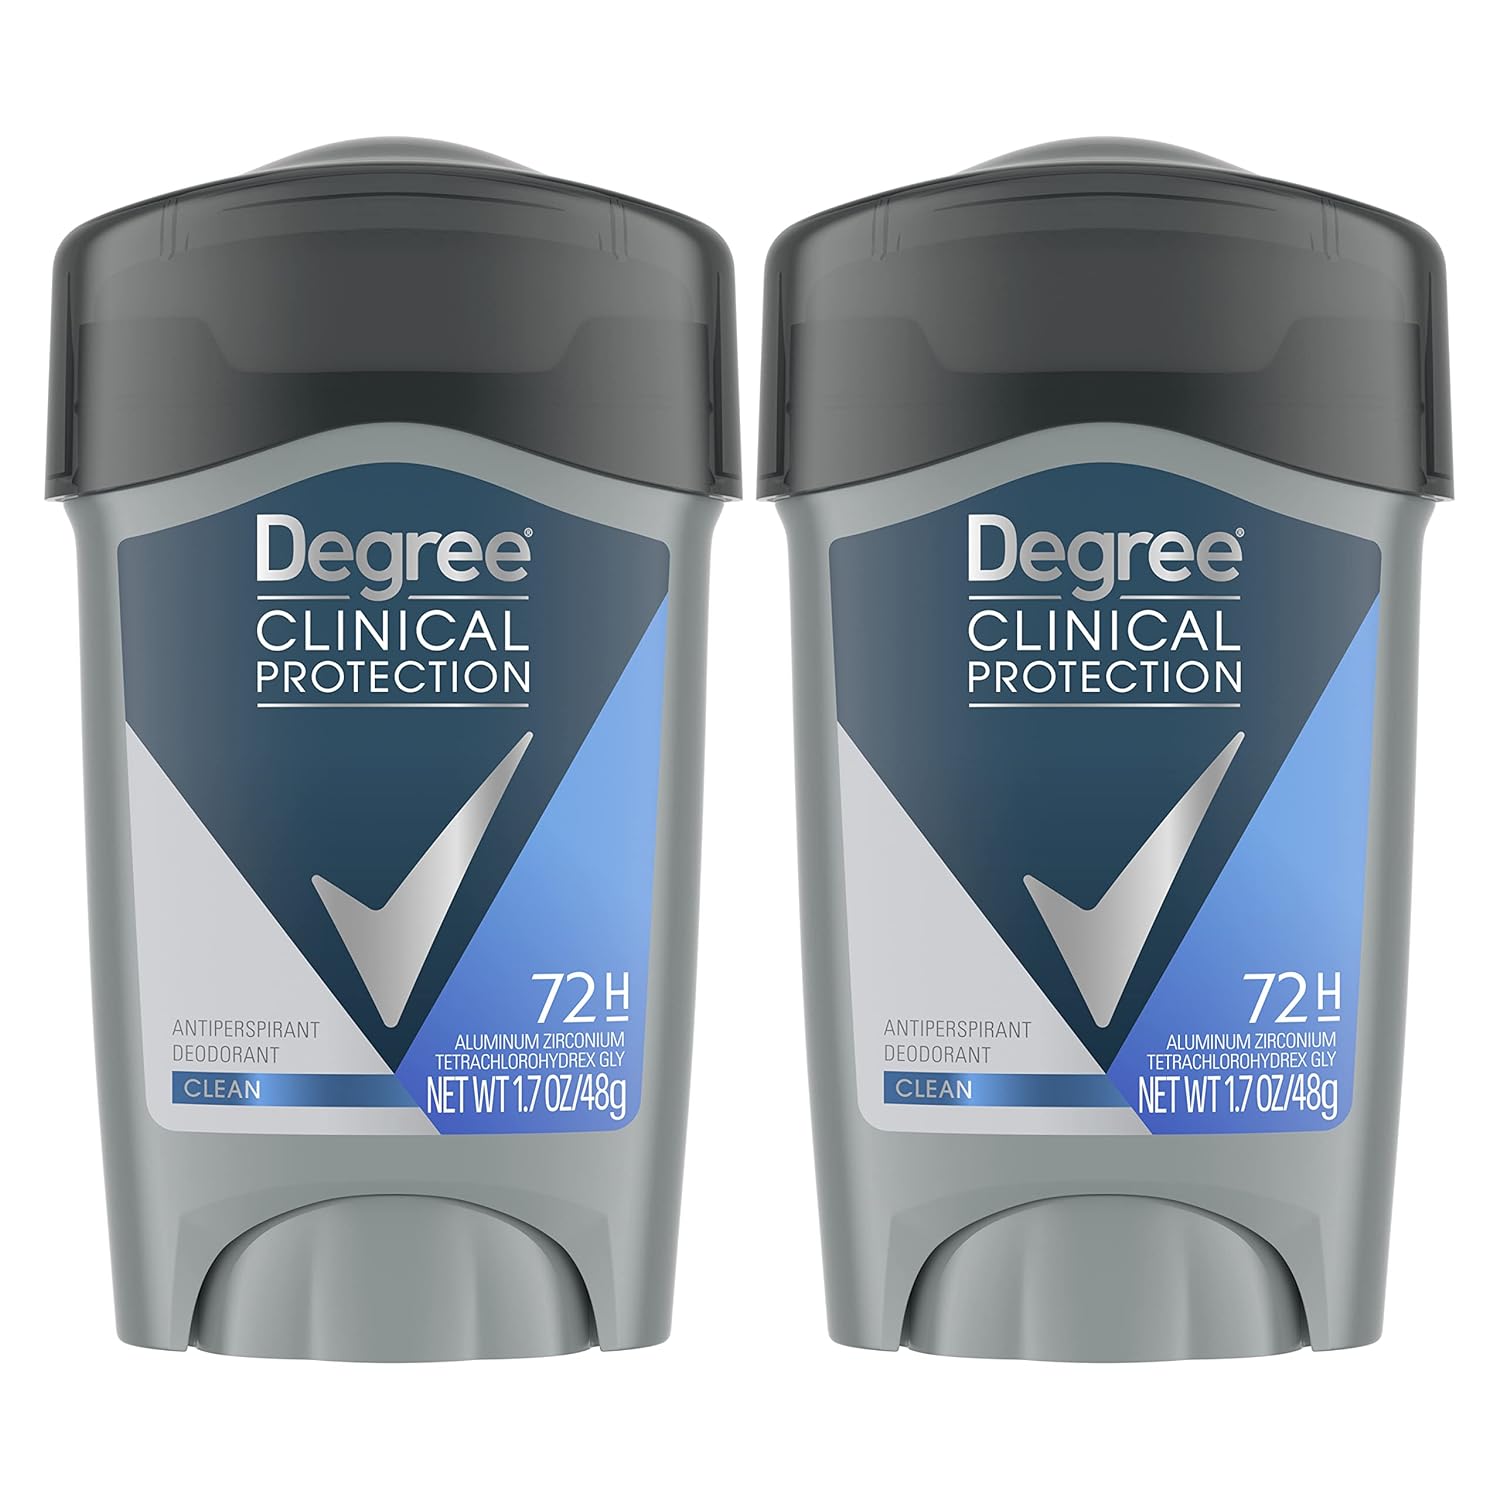 Degree Men Clinical Protection Antiperspirant Deodorant 72-Hour Sweat & Odor Protection Clean Prescription-Strength Antiperspirant For Men with MotionSense Technology 1.7 oz, Pack of 2